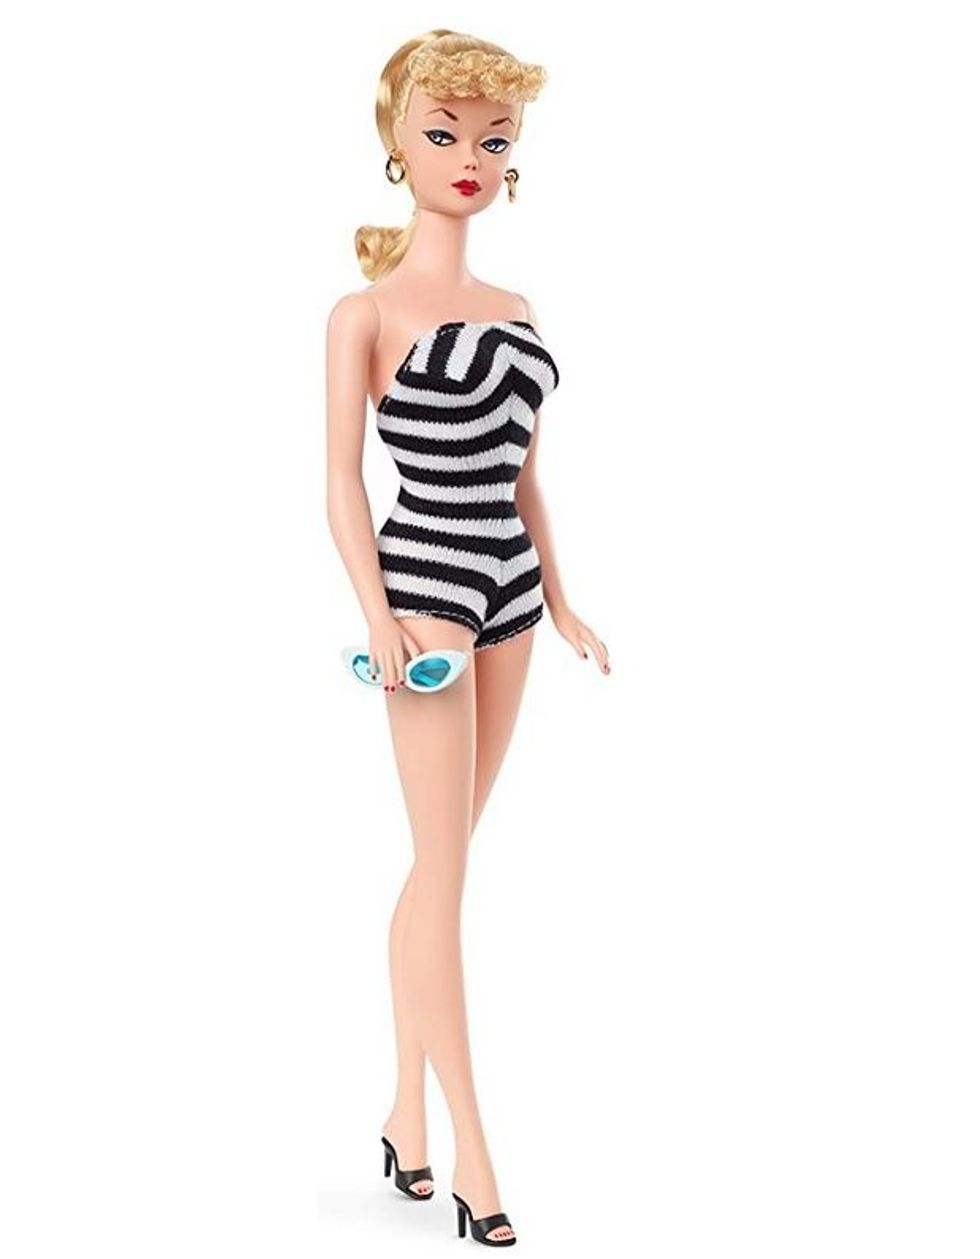 On this day in history, March 9, 1959, Barbie makes fashionable world debut  at New York Toy Fair